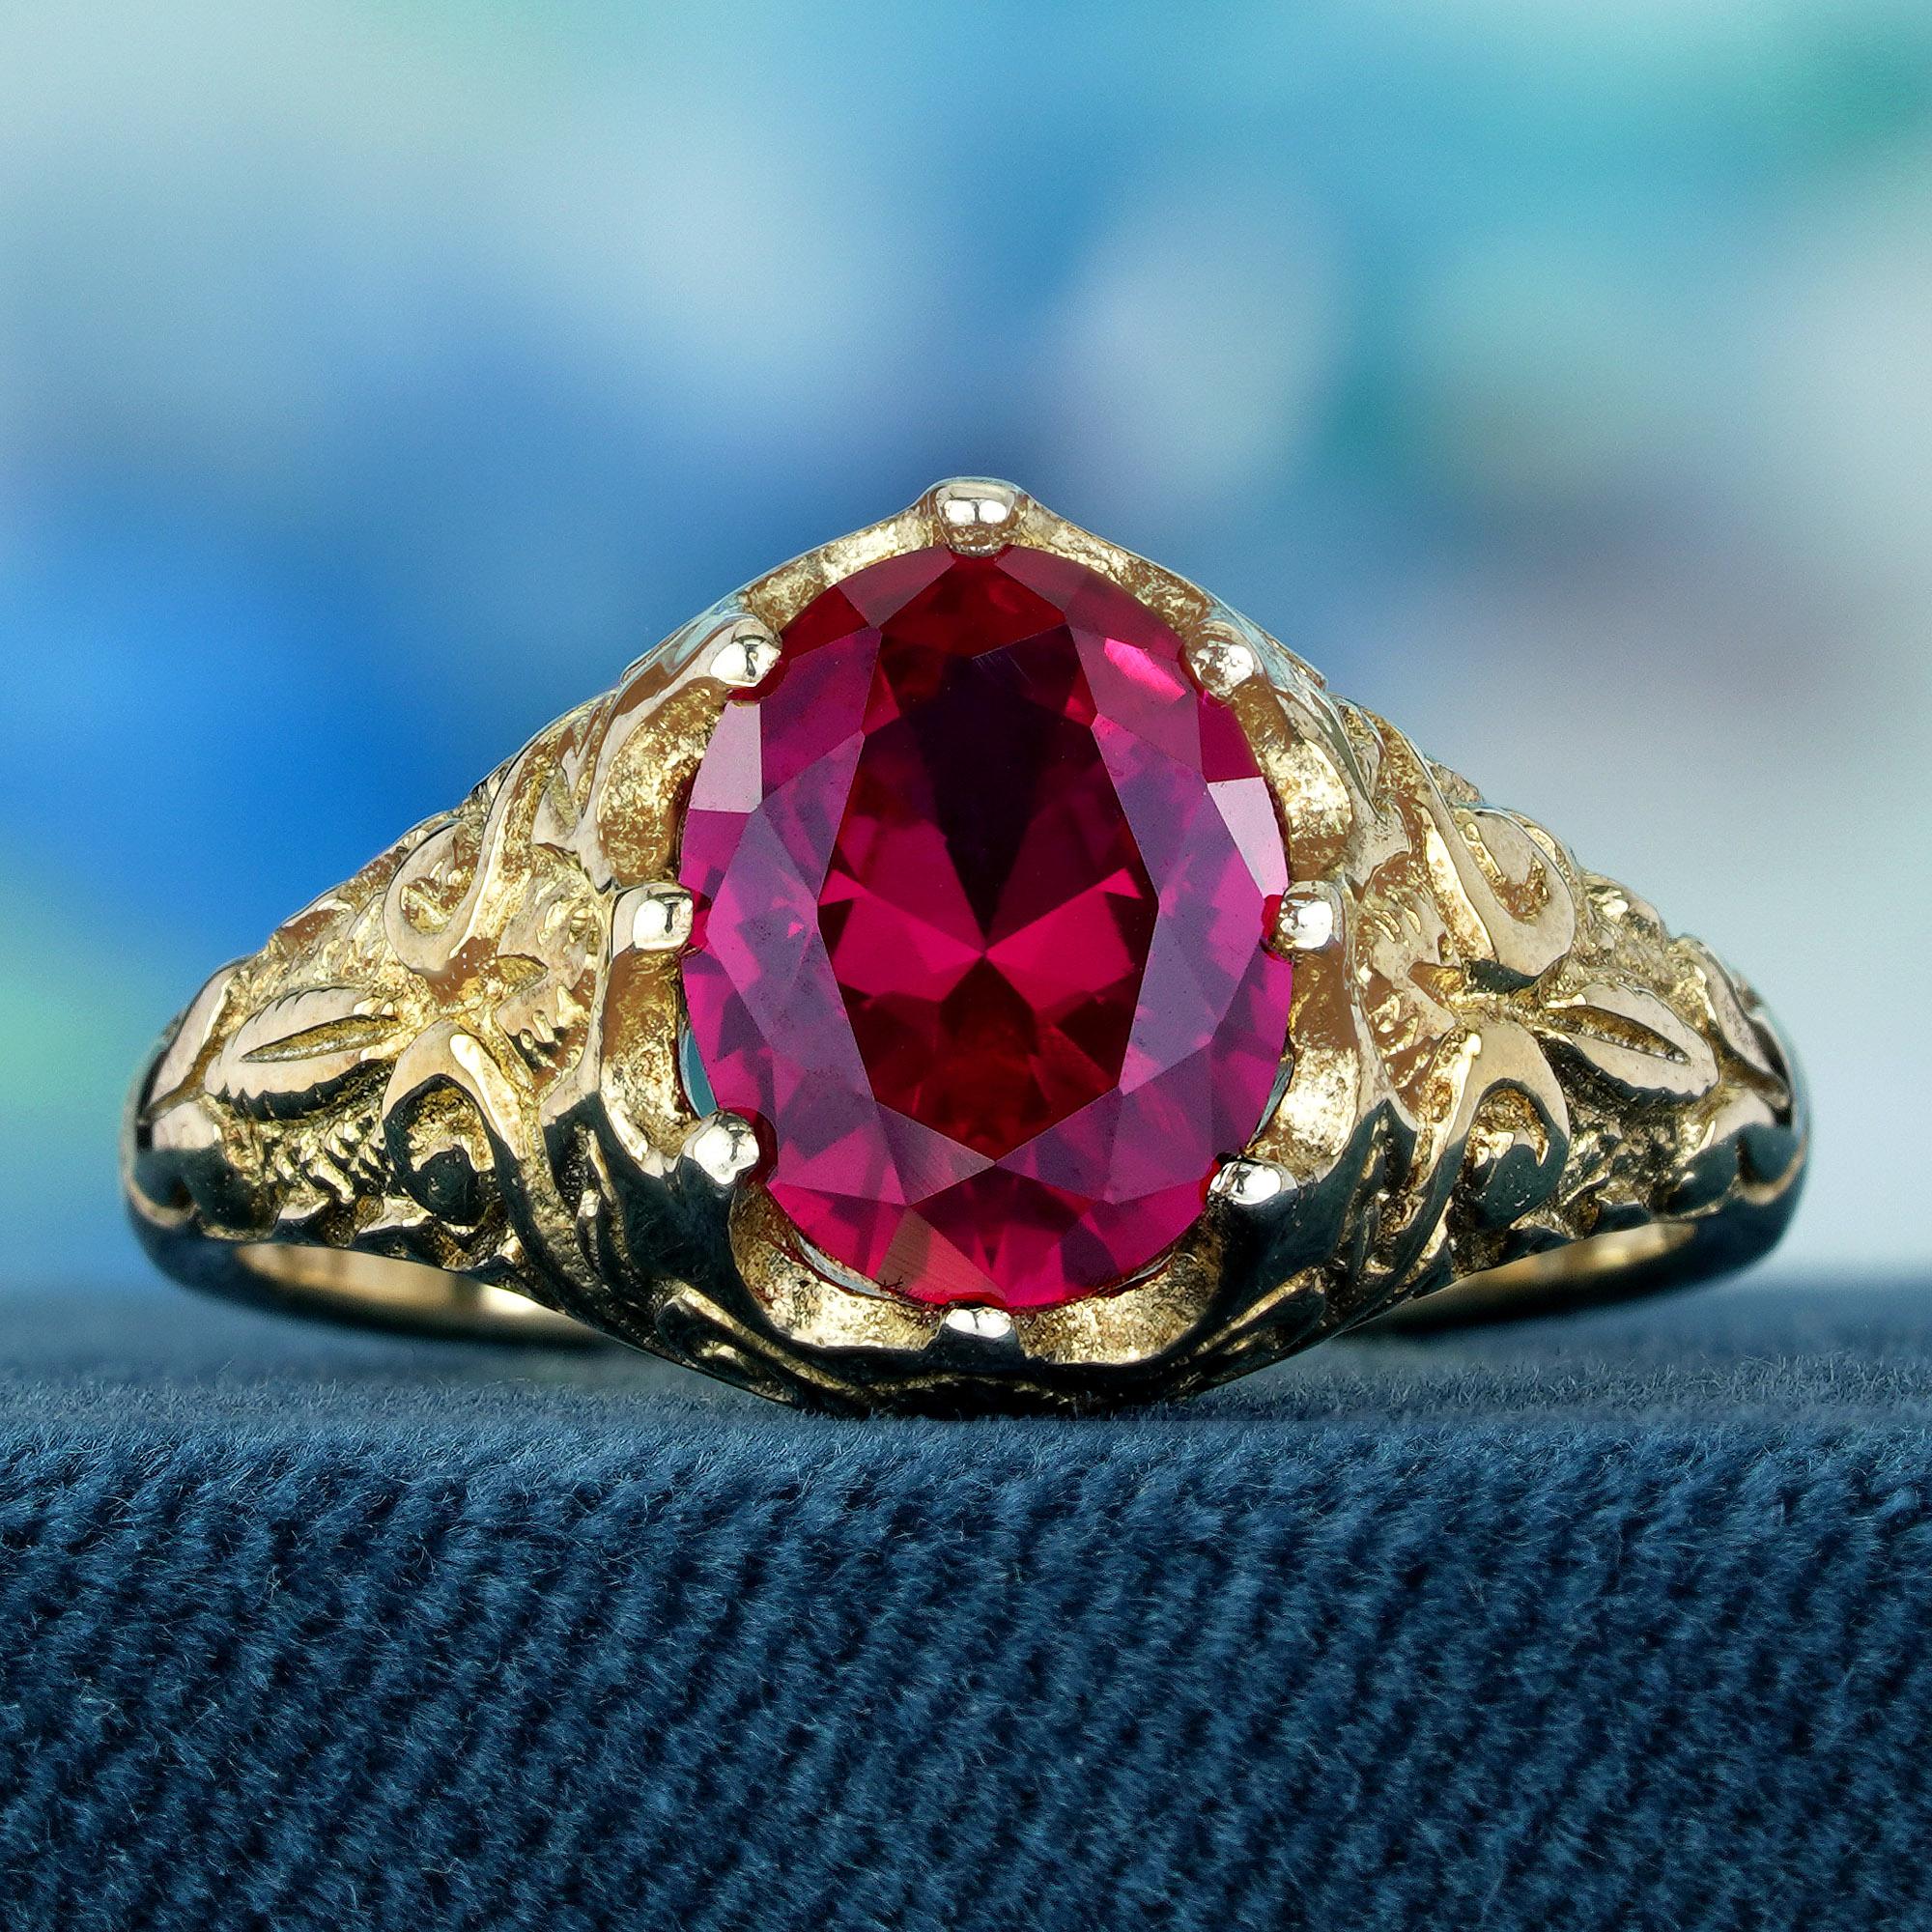 Dazzled by a faceted fiery oval red ruby gemstone, this ring is a testament to intricate craftsmanship set in delicate yellow gold. The swirling carved band showcases exceptional artistry and meticulous attention to detail. Treat yourself to a touch